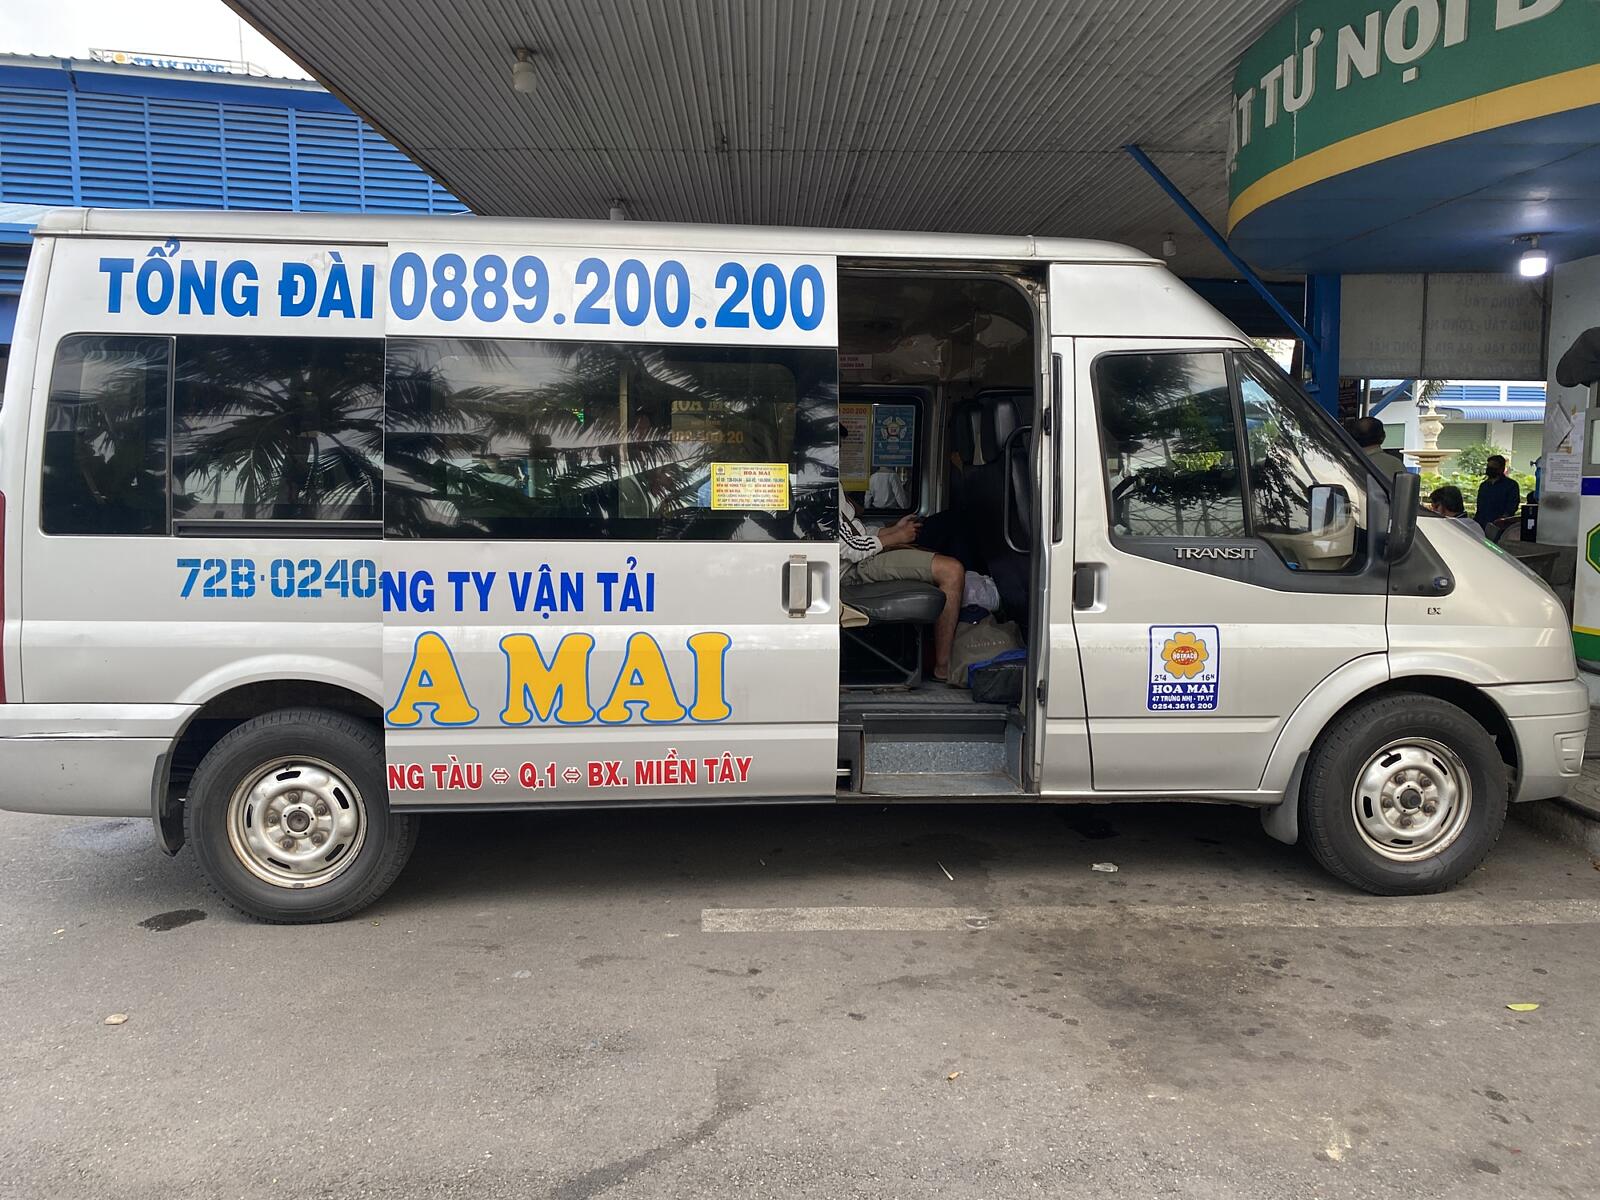 A photo of a limousine van operating between Ho Chi Minh and Vung Tau